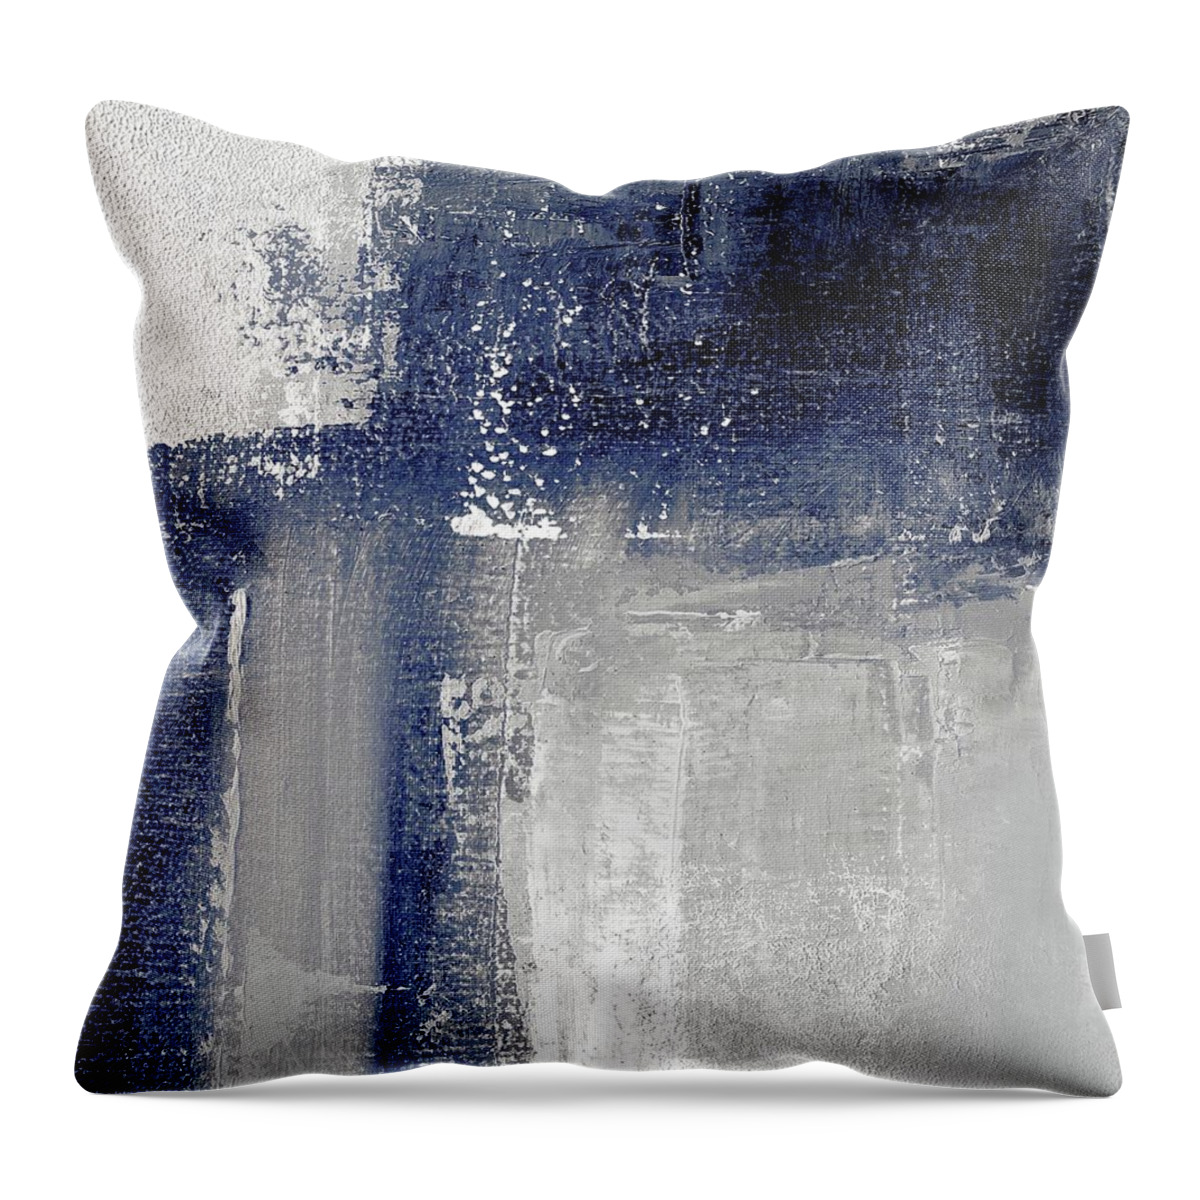 Navy blue and grey abstract Throw Pillow by Vesna Antic - Pixels